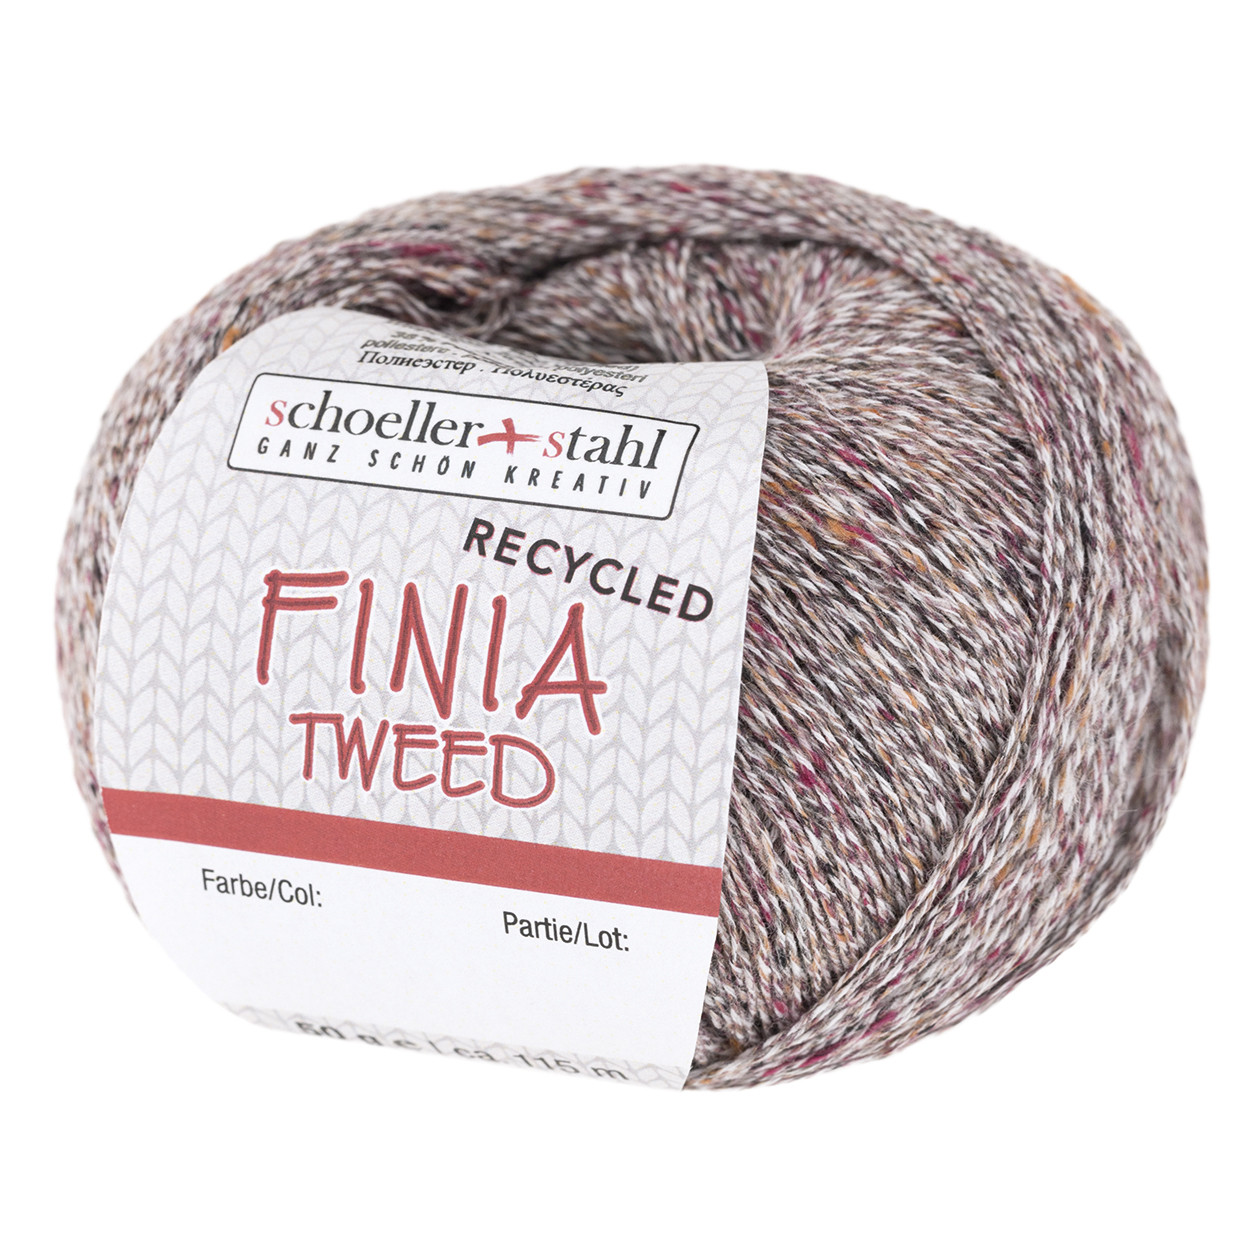 Finia Tweed Recycled